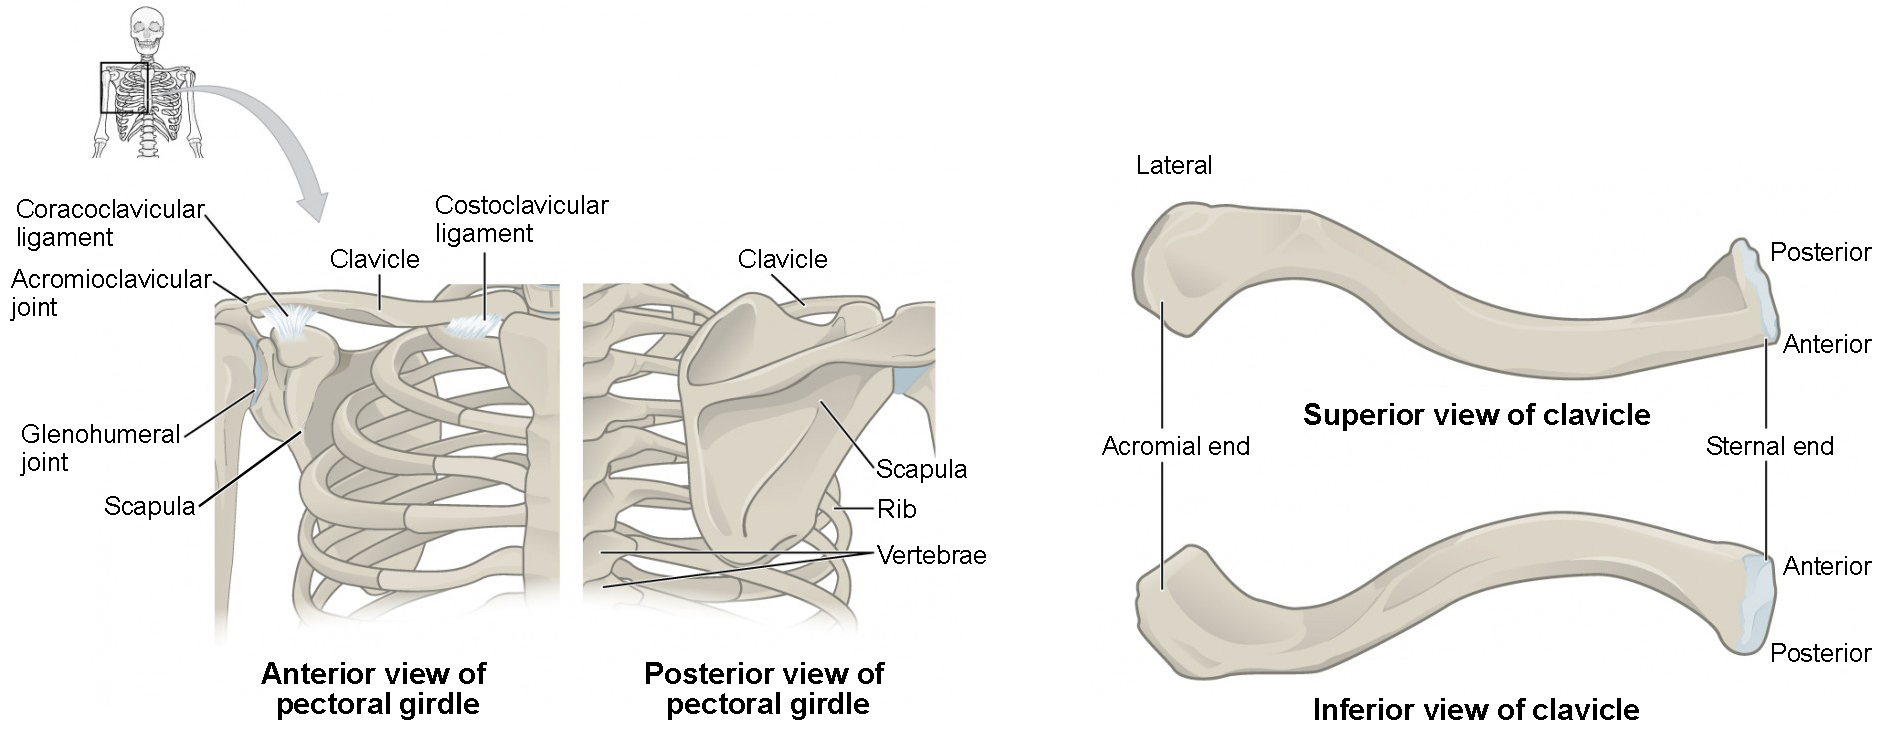 This figure shows the rib change. The top left panel shows the anterior view, and the top right panel shows the posterior view. The bottom panel shows two bones.